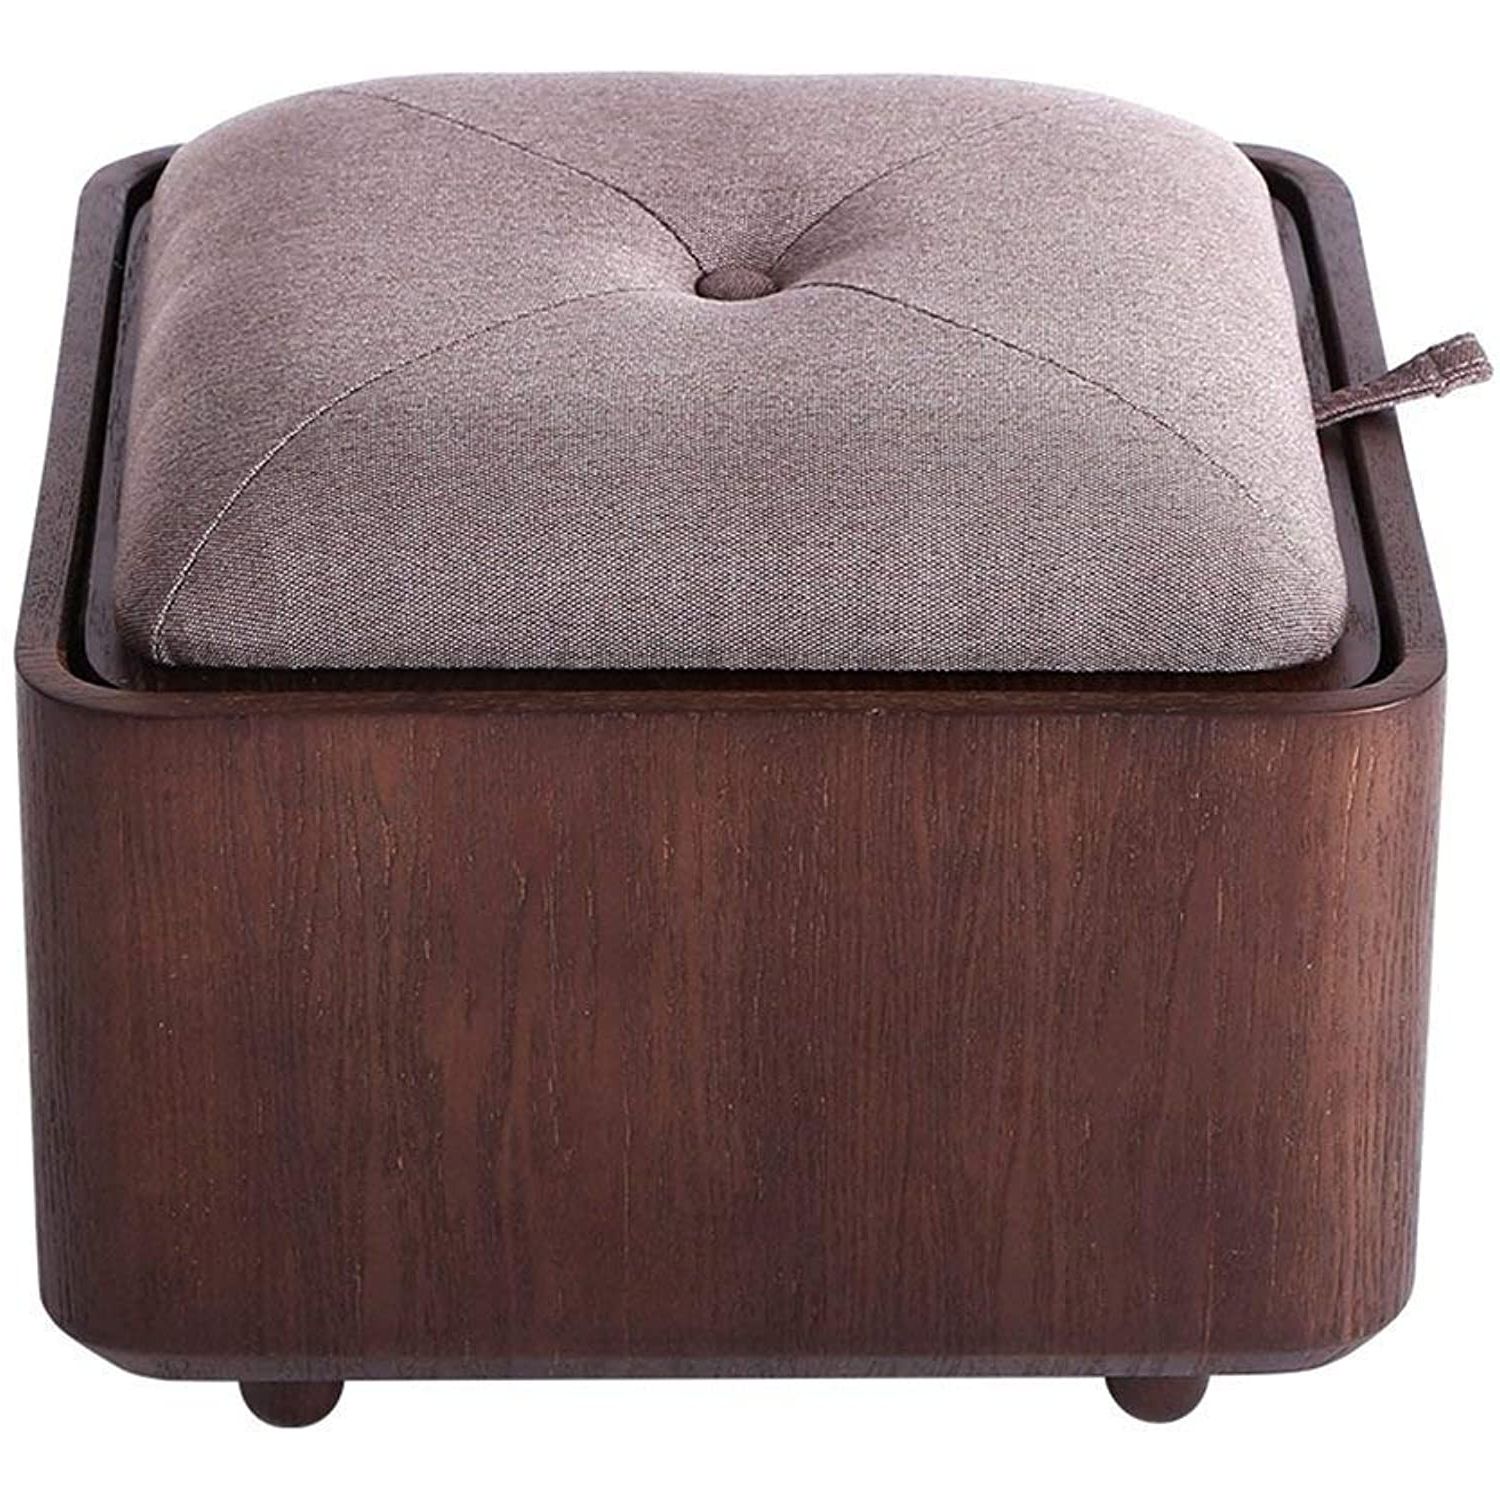 Trendy Black And Ivory Solid Cube Pouf Ottomans Intended For Amazon: Thbeibei Ottomans Small Table Storage Ottoman Box Footrest (View 1 of 10)